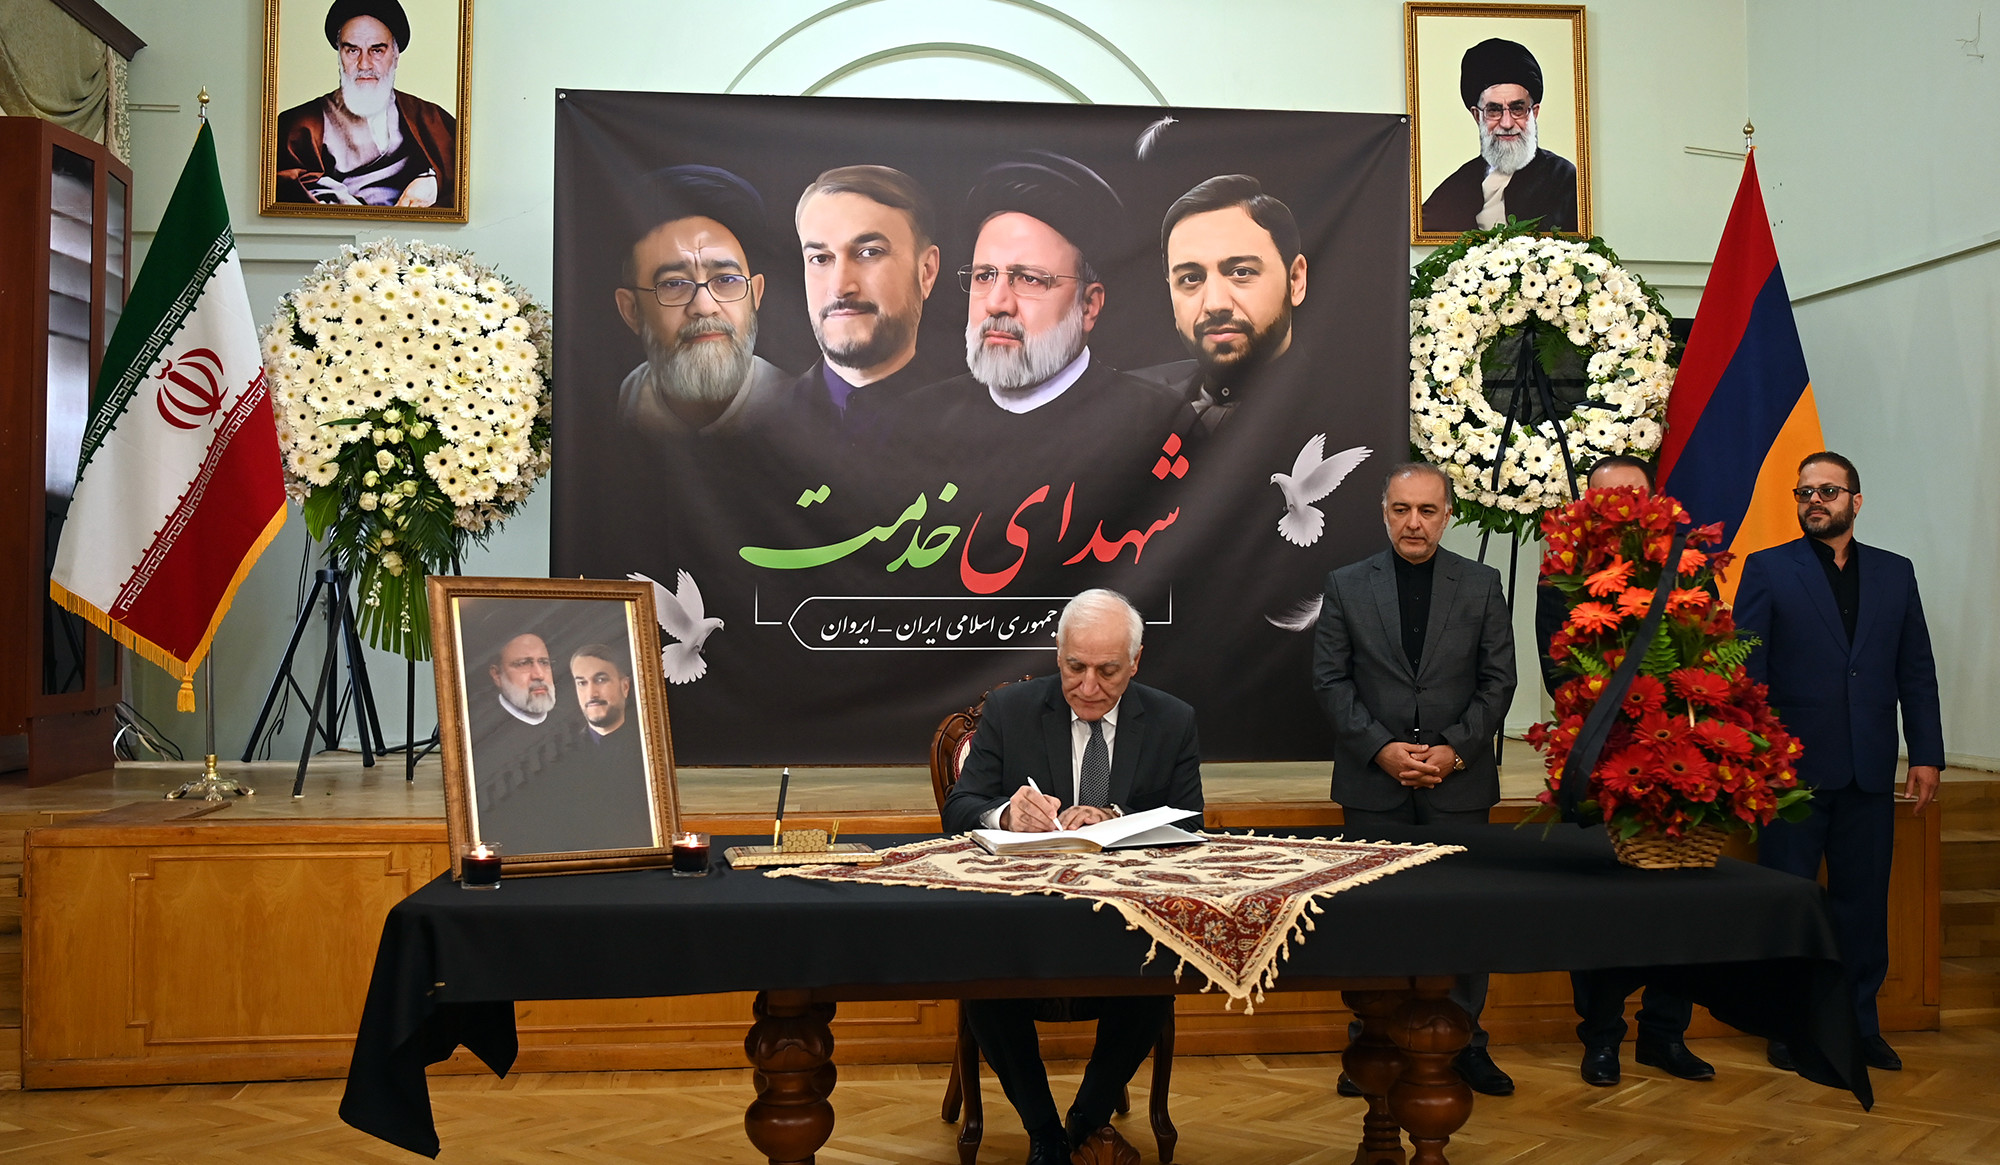 President made note of condolence in mourning register on occasion of death of president of Iran and high-ranking officials